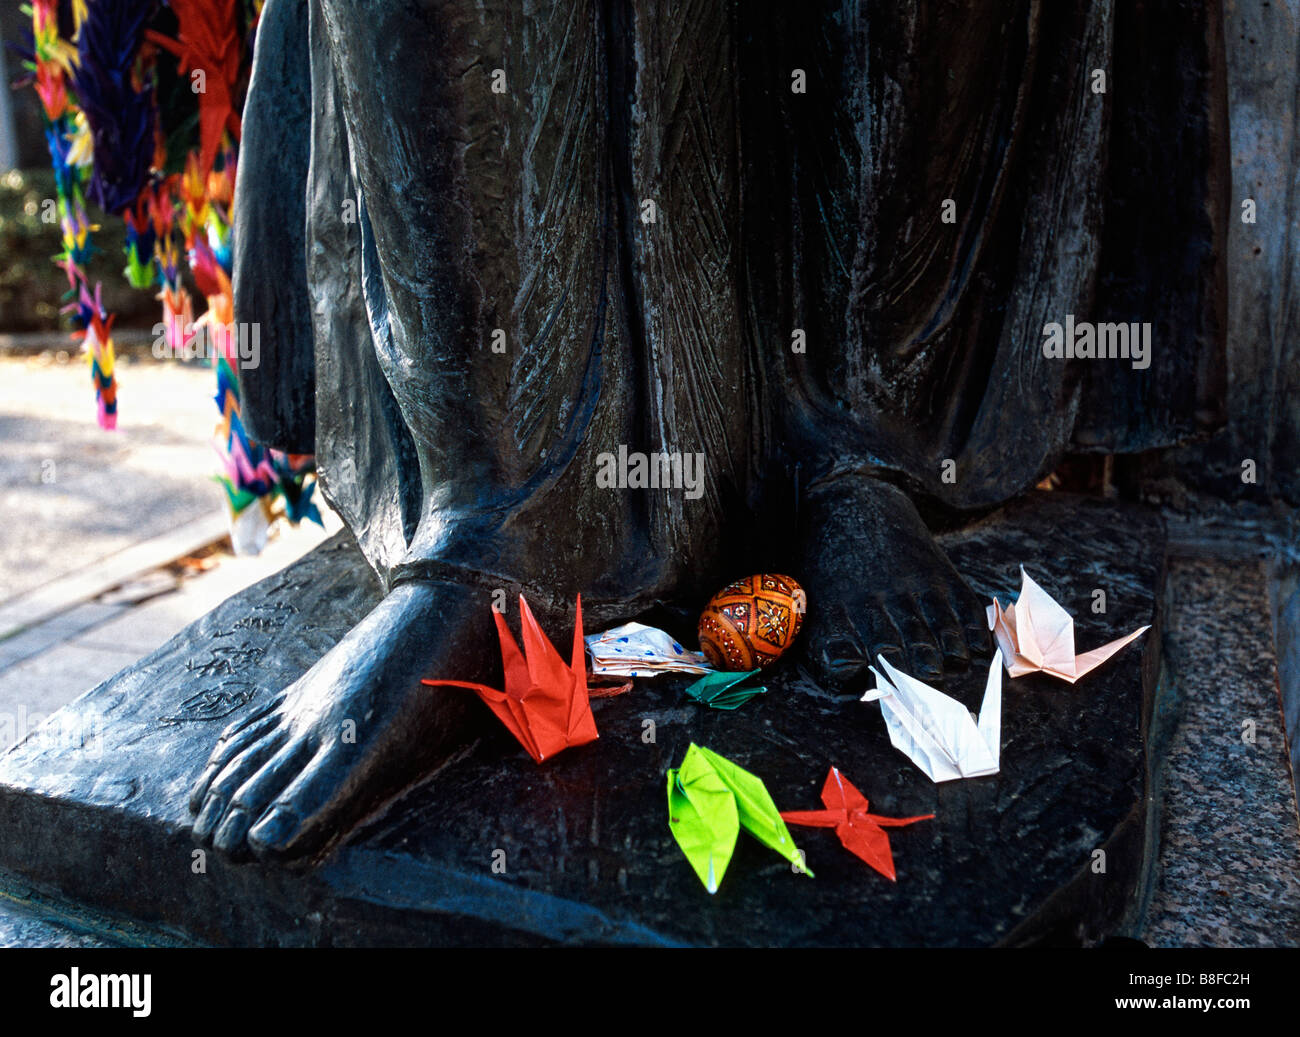 Paper cranes are laid at the feet of a statue in Hiroshima, Japan Stock Photo